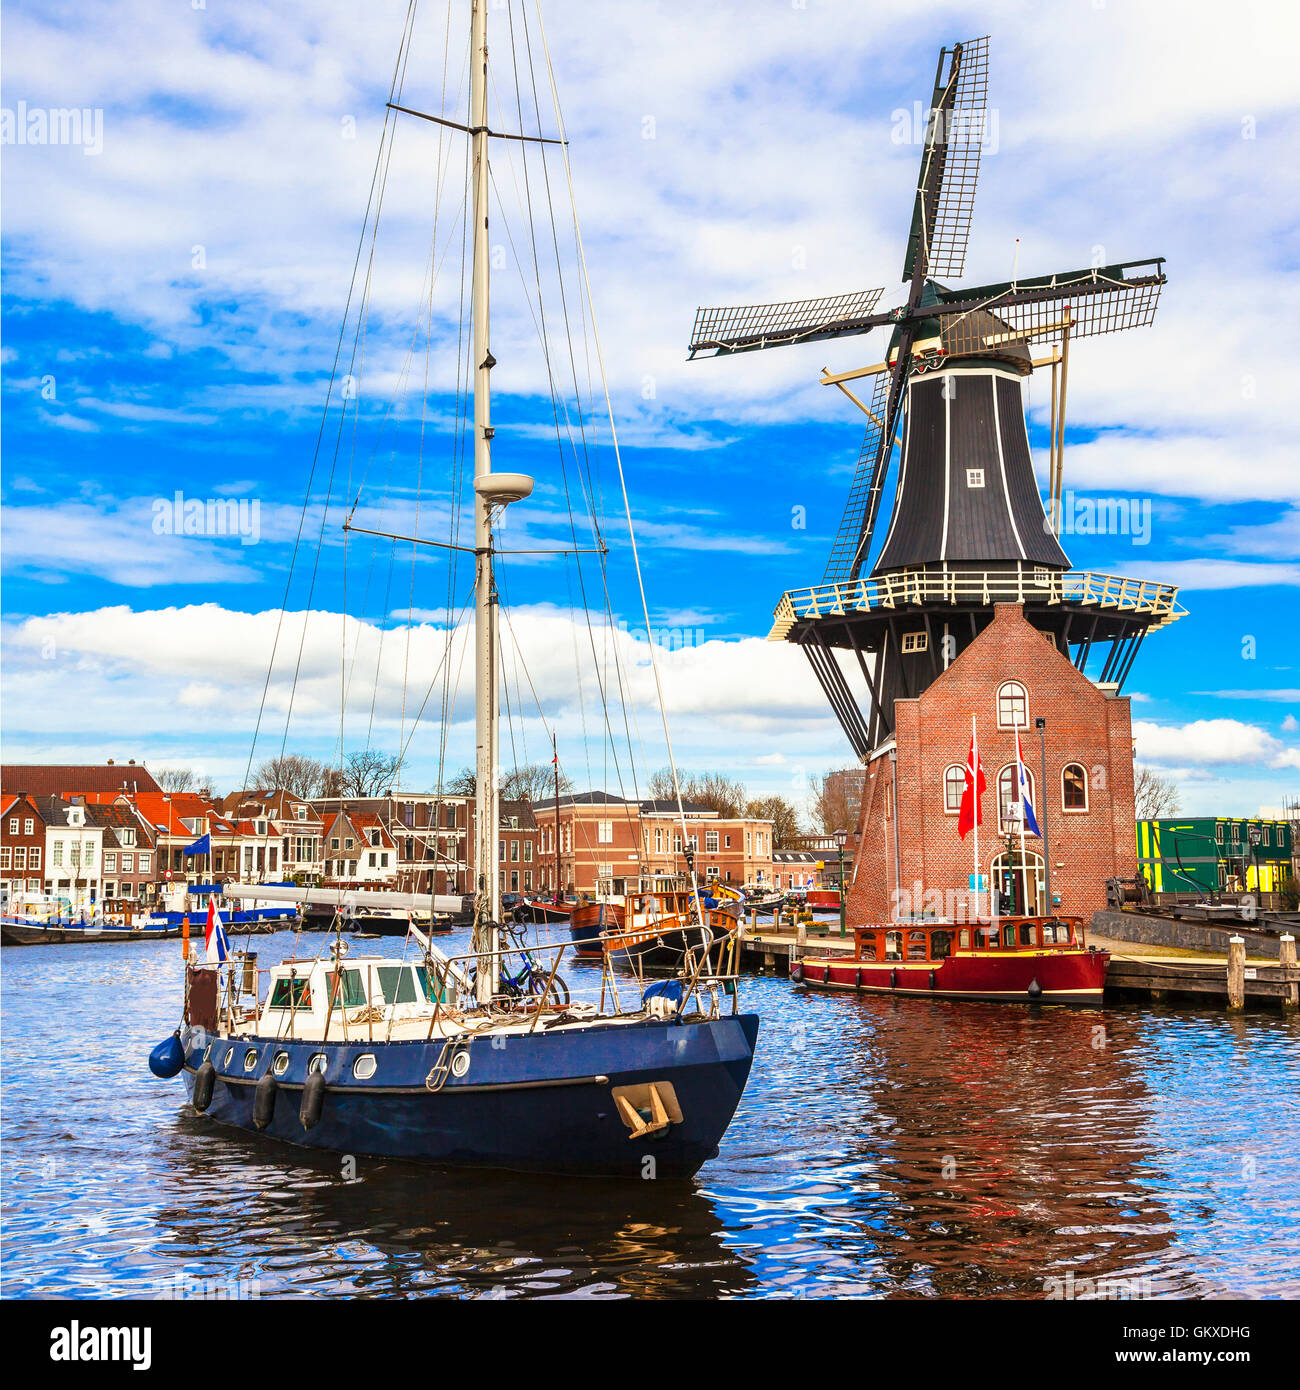 Traditional Holland - windmill of Harlem, canal with sailing boat Stock Photo